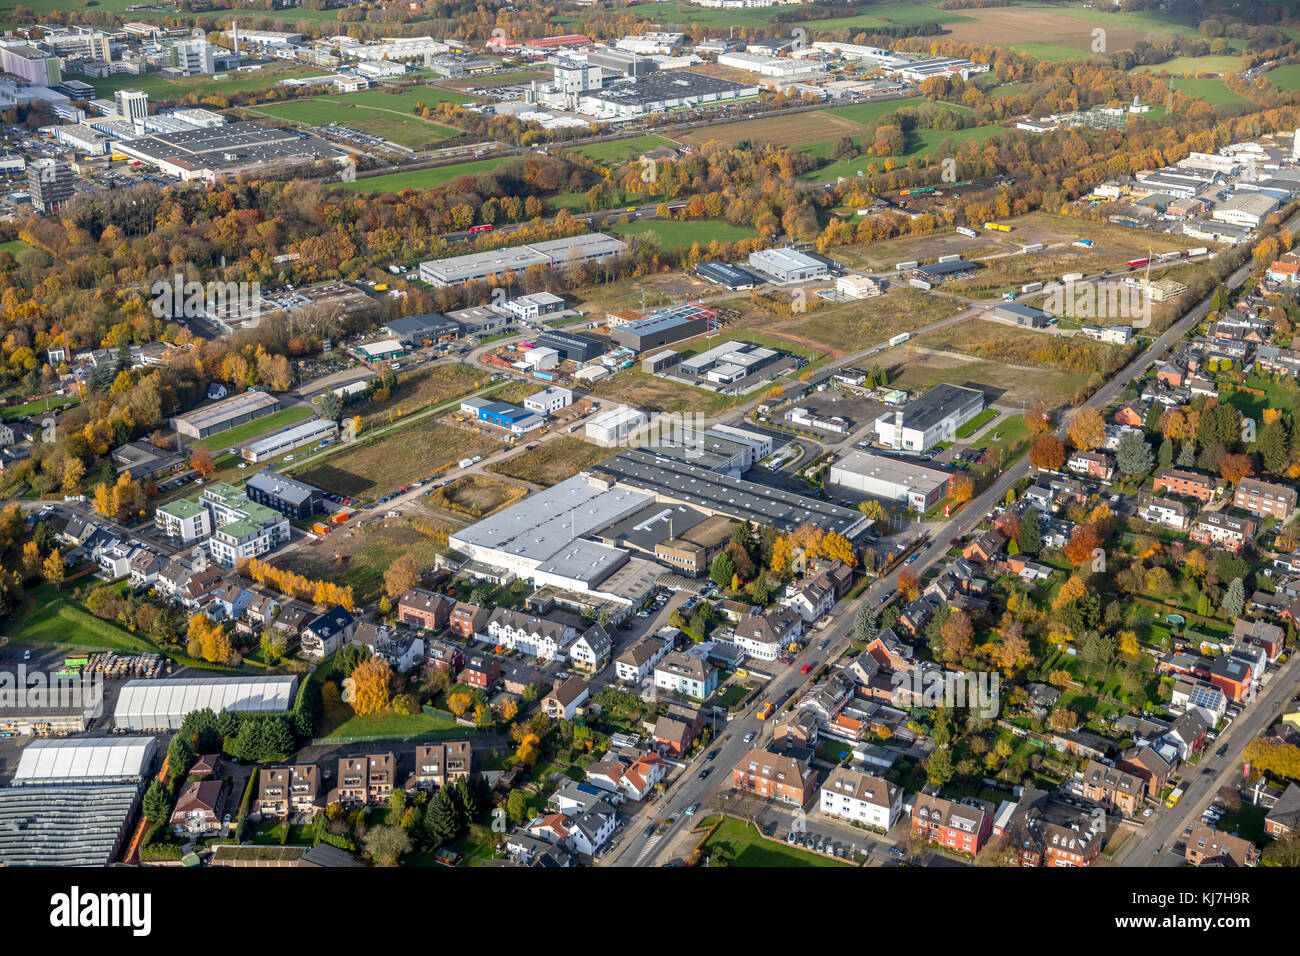 Commercial zone Aachen-Brand, AAV preparation, conversion, reprocessing of a barracks site, former Belgian barracks Camp Pirotte in Aachen-Brand A44,  Stock Photo